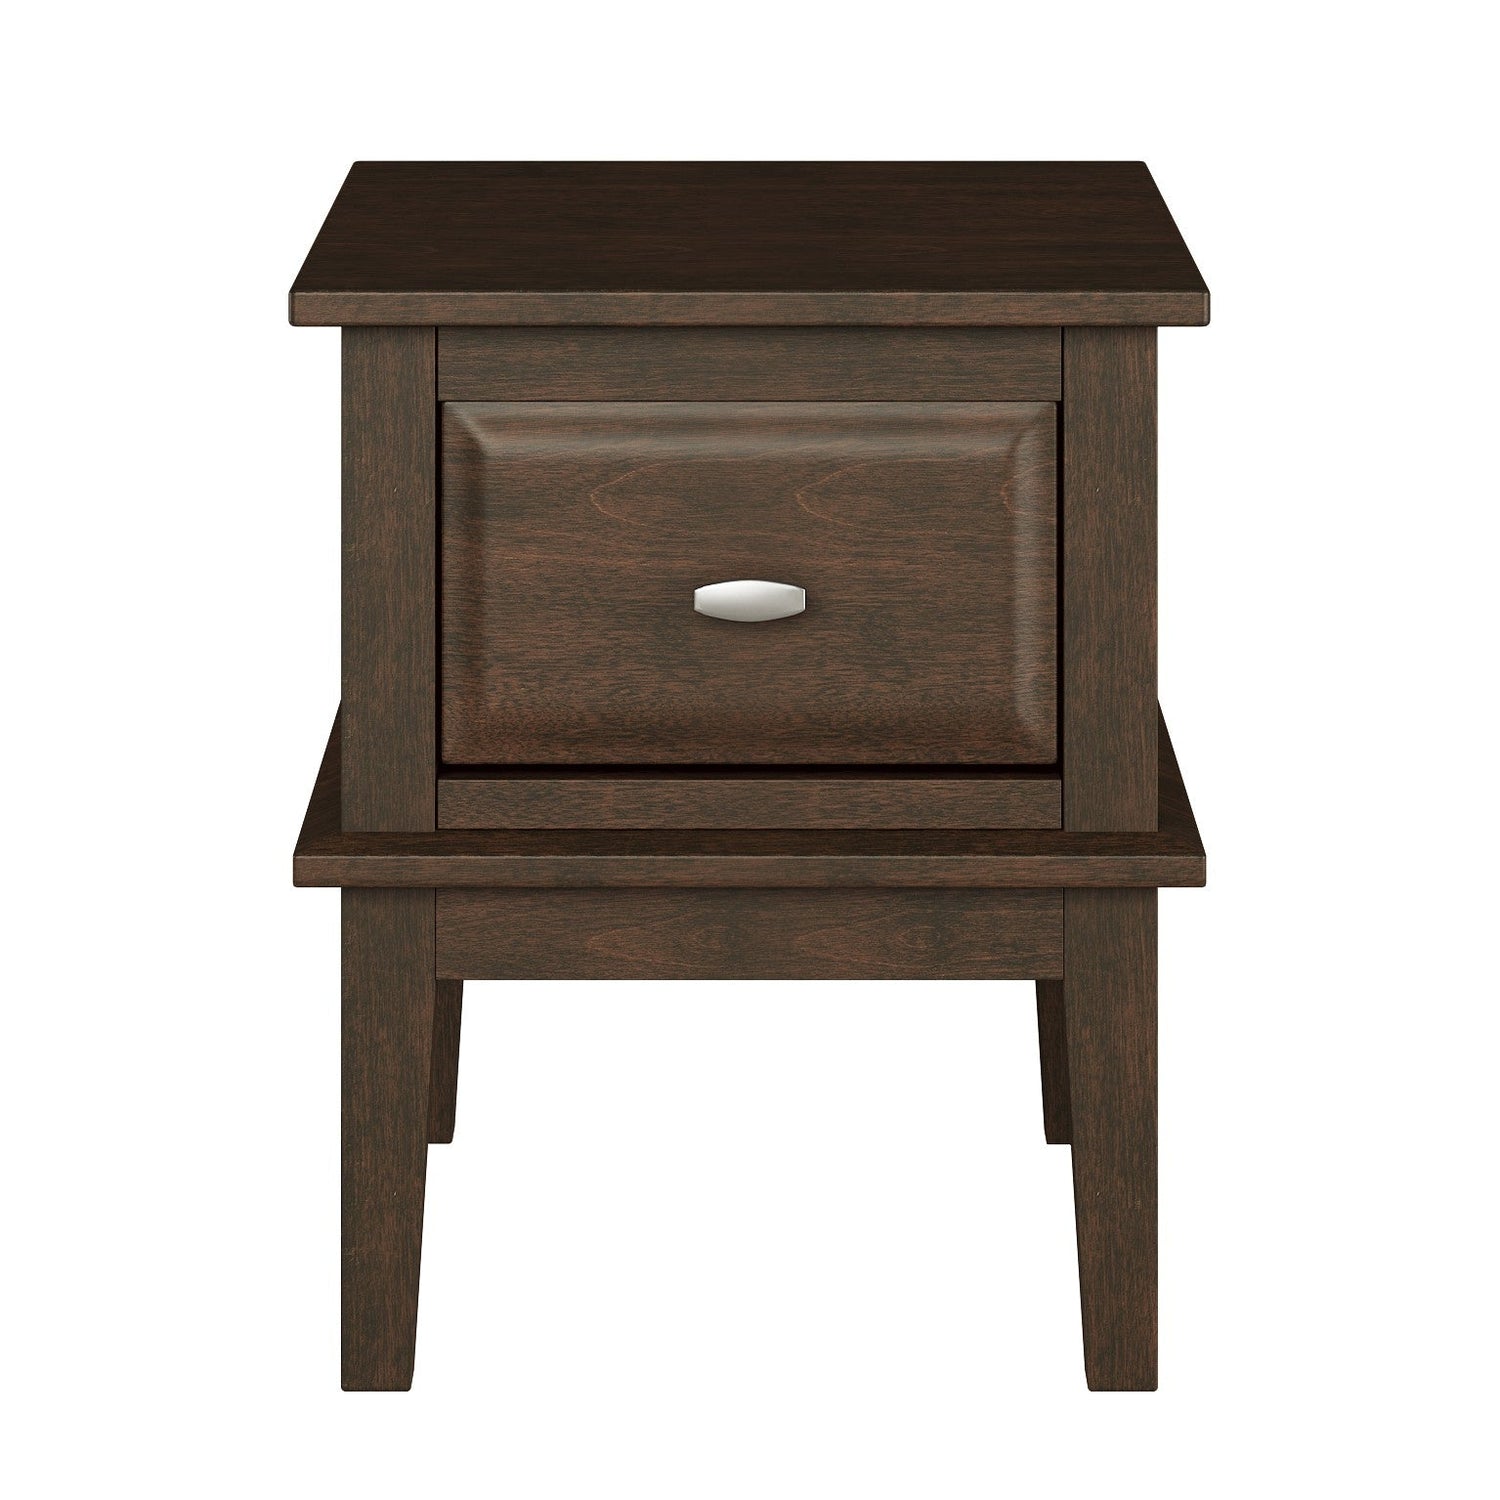 Minot Brown Cherry End Table - 3621-04 - Bien Home Furniture &amp; Electronics